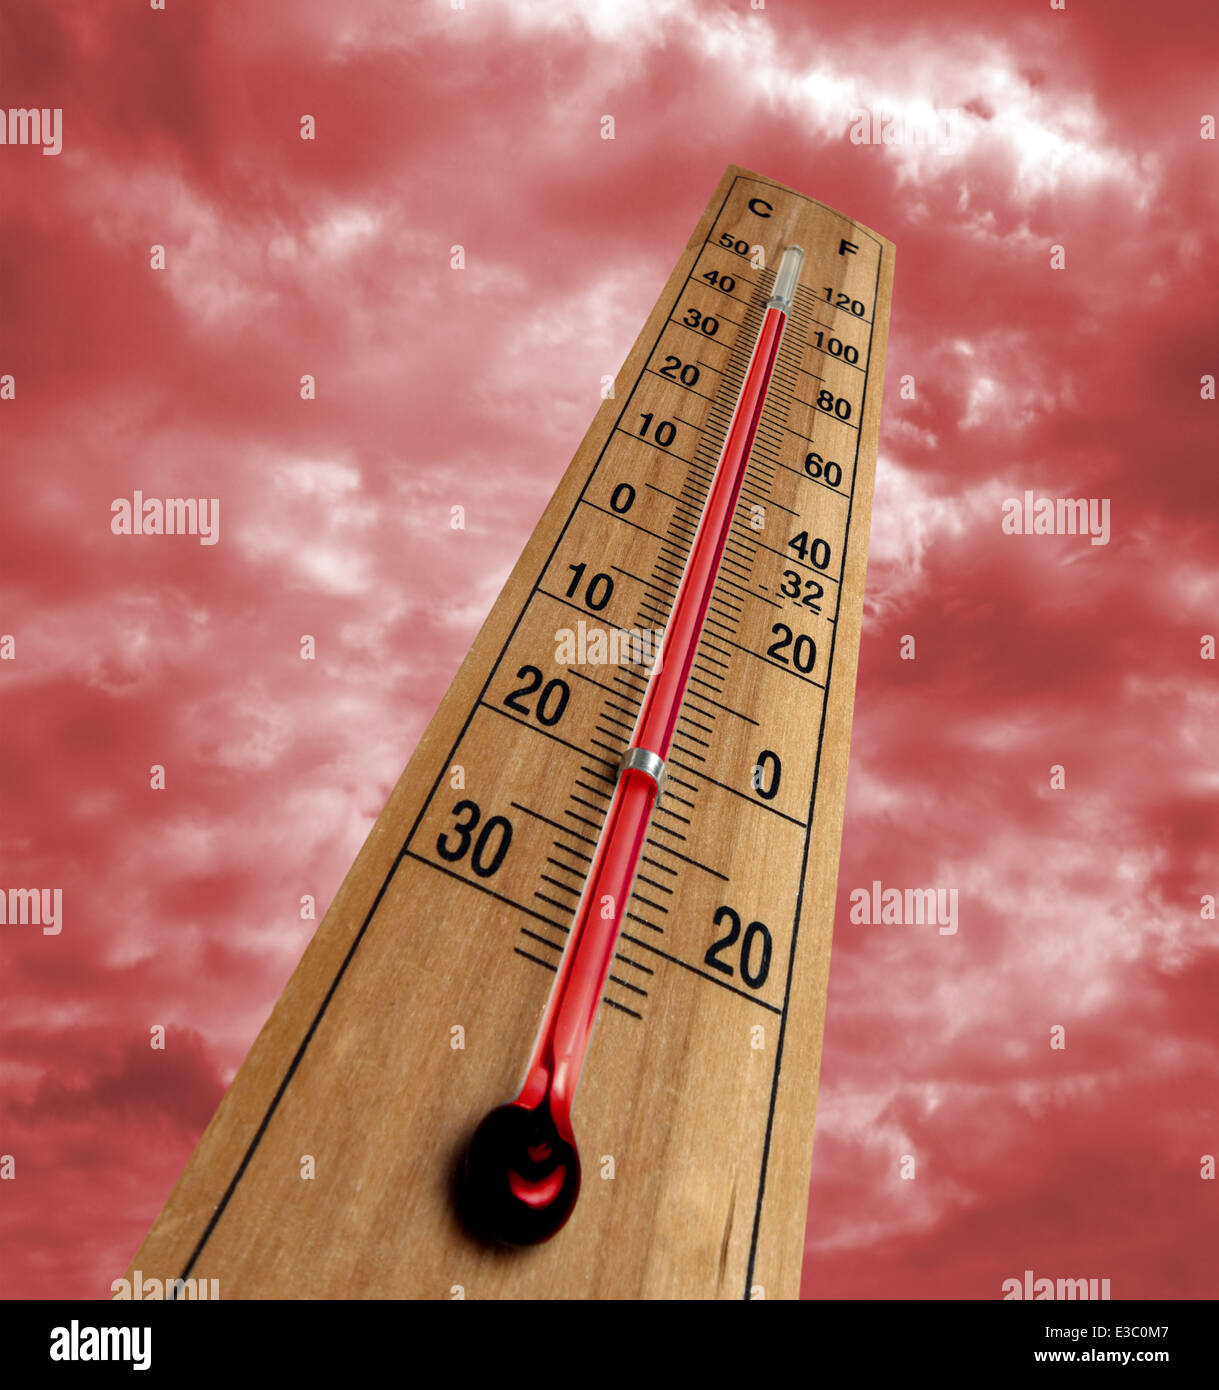 Rising temperature due to climate change. Stock Photo